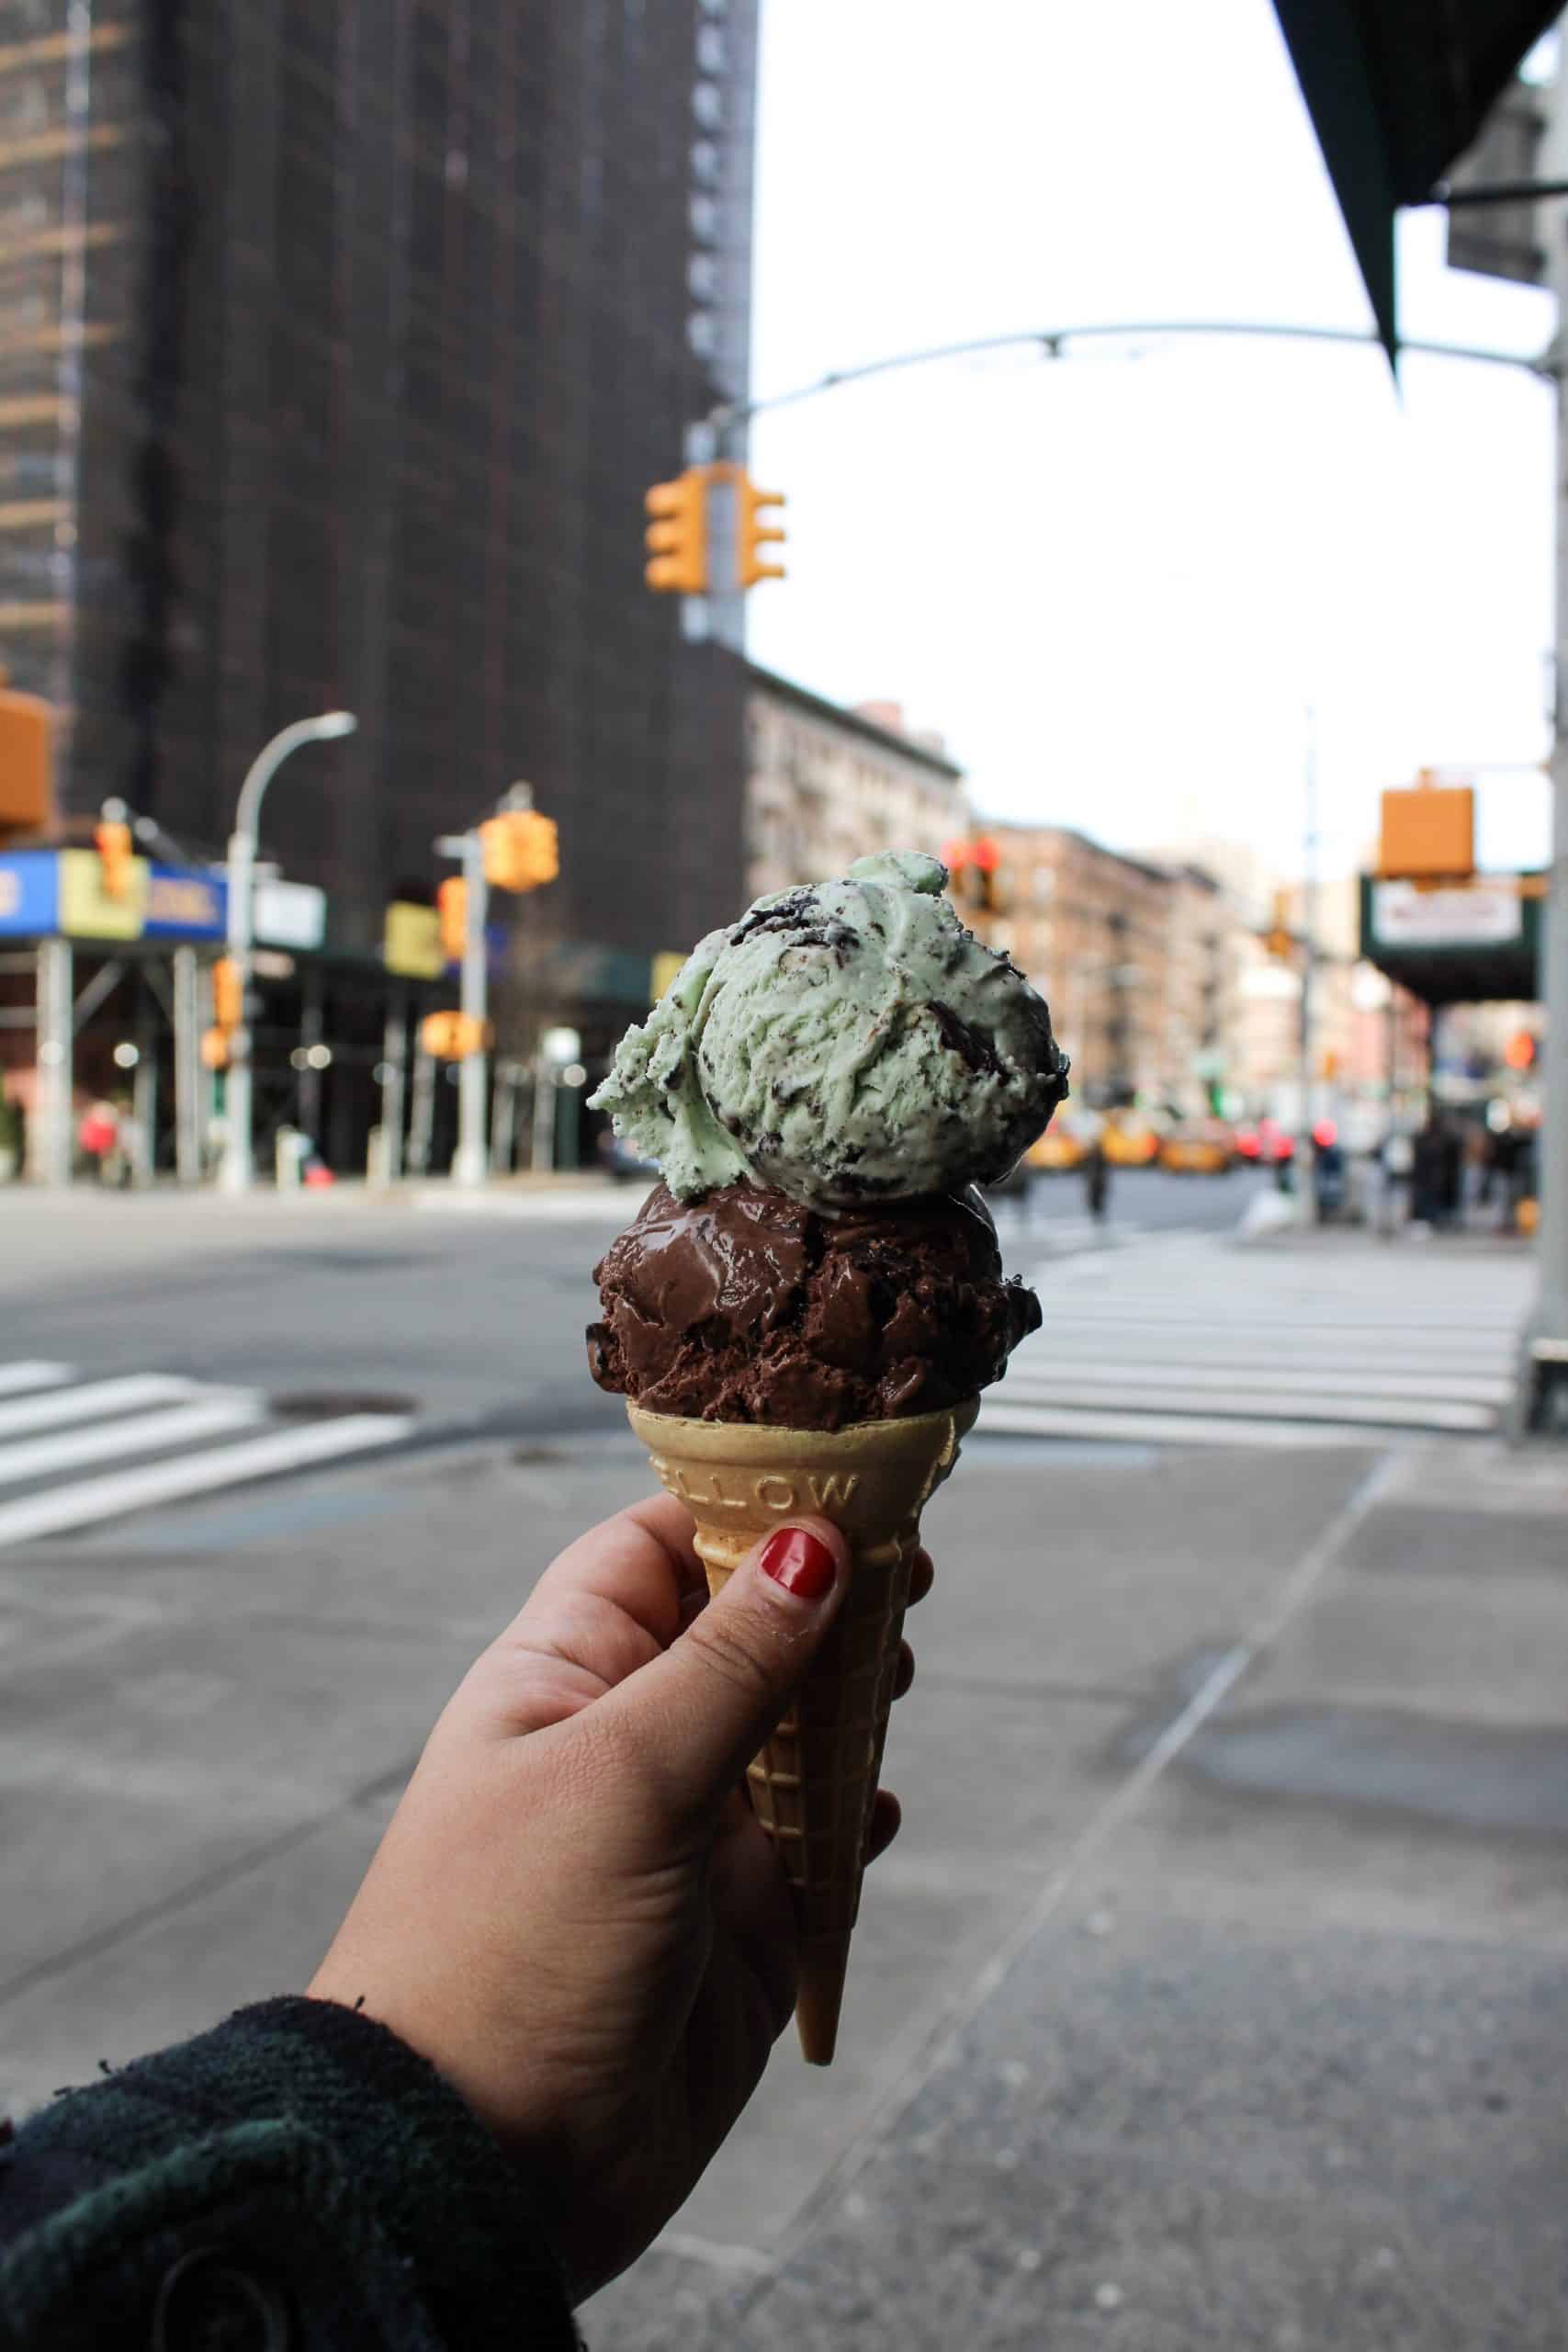 Whether you fancy soft serve or scoops, our guide to the best ice cream in NYC won't let you down when you're in the mood for a cold treat!